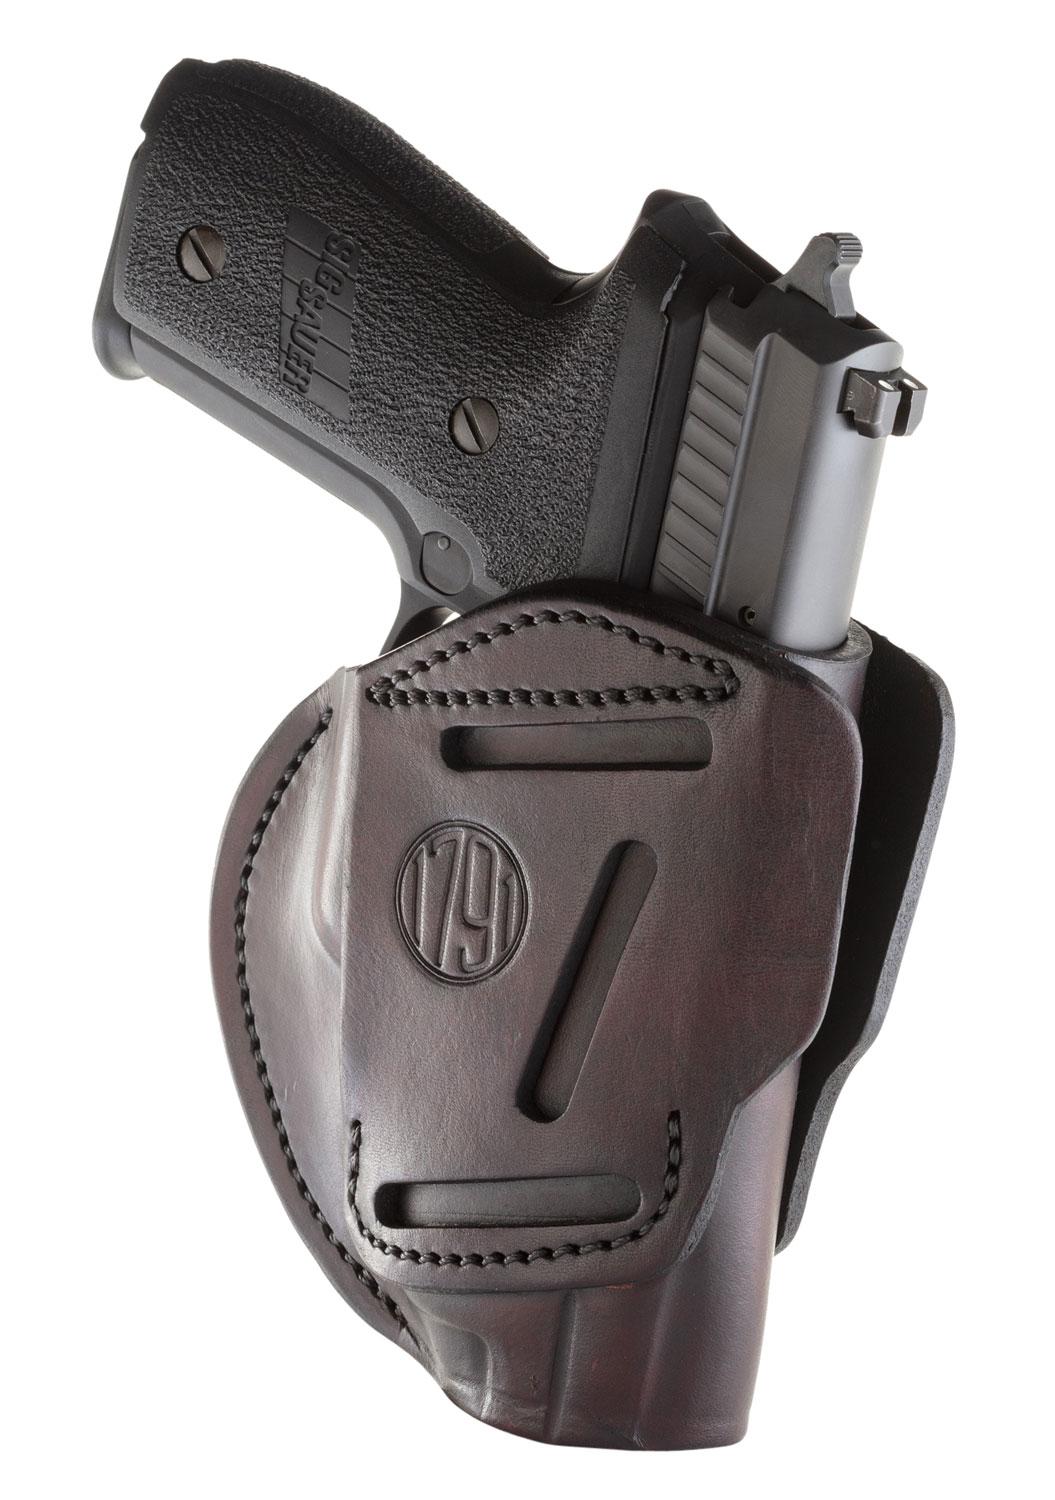  3 Way Holster A Size 5 Signature Brown